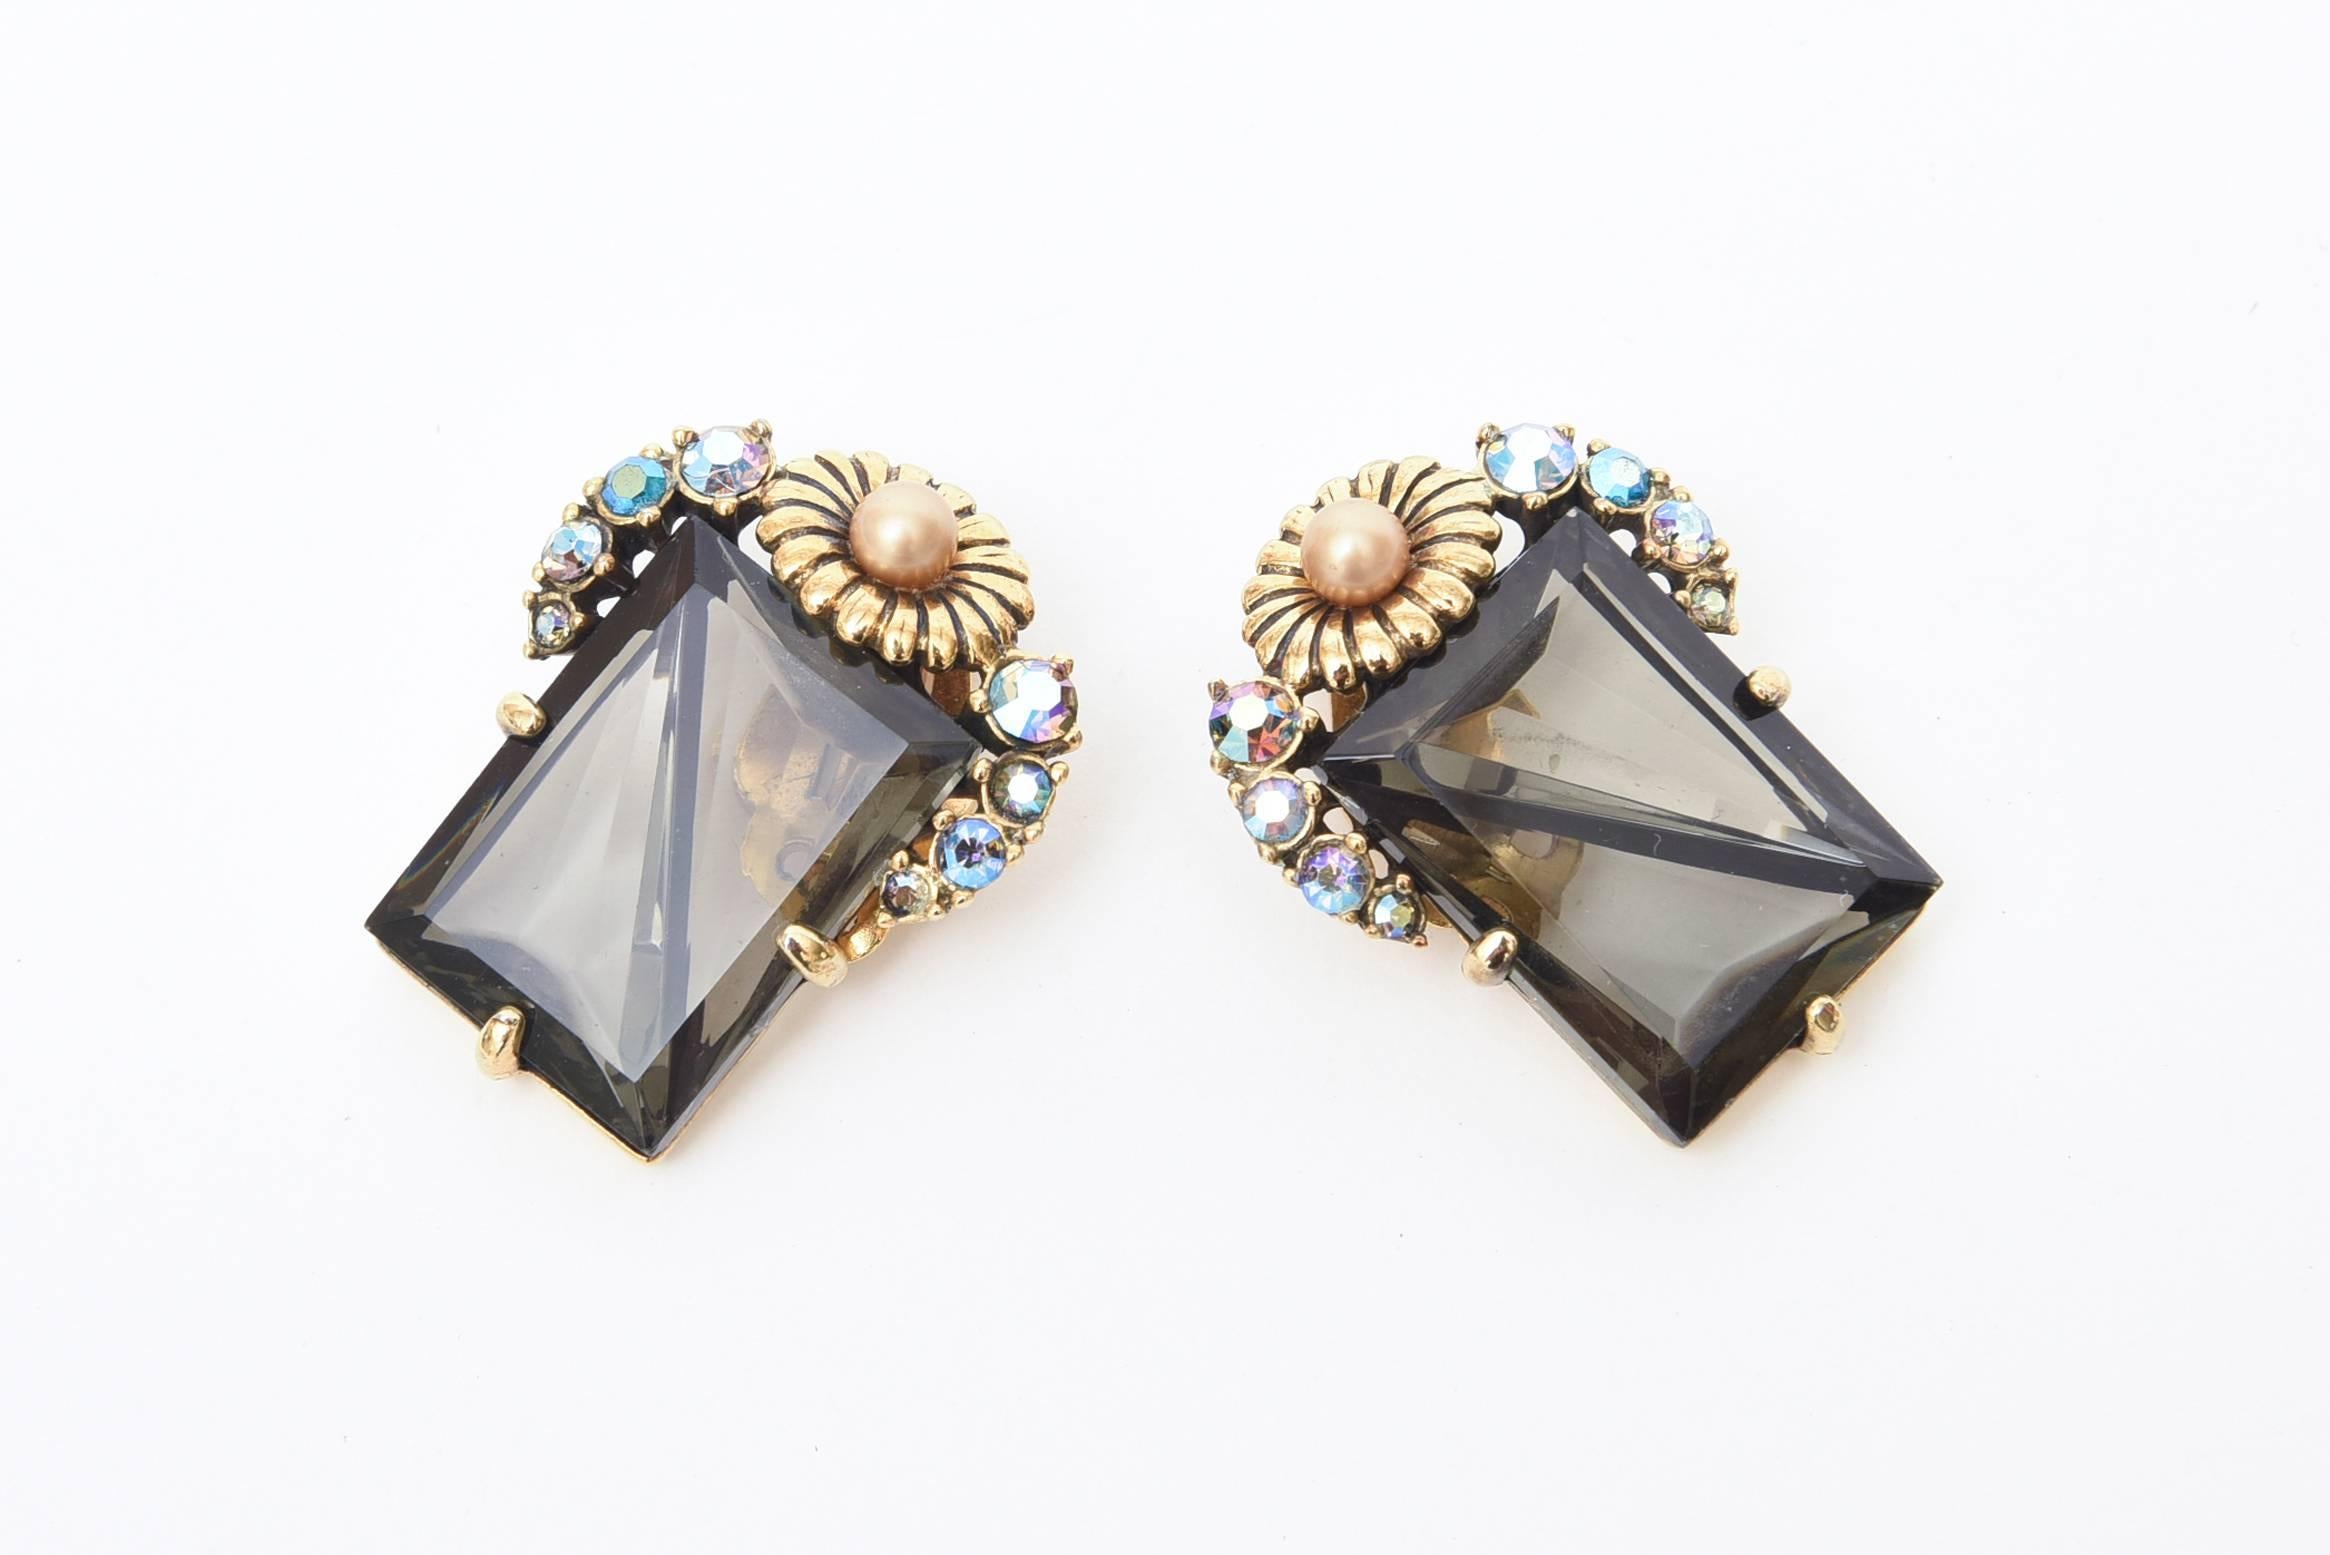 The combination of faceted smoky topaz crystal glass with turquoise Boris Aurealis glass stones and clear rhinestones set of with a flower top in gilt metal make these signed vintage Elsa Schiaparelli clip on earrings so elegant. They hug the ear